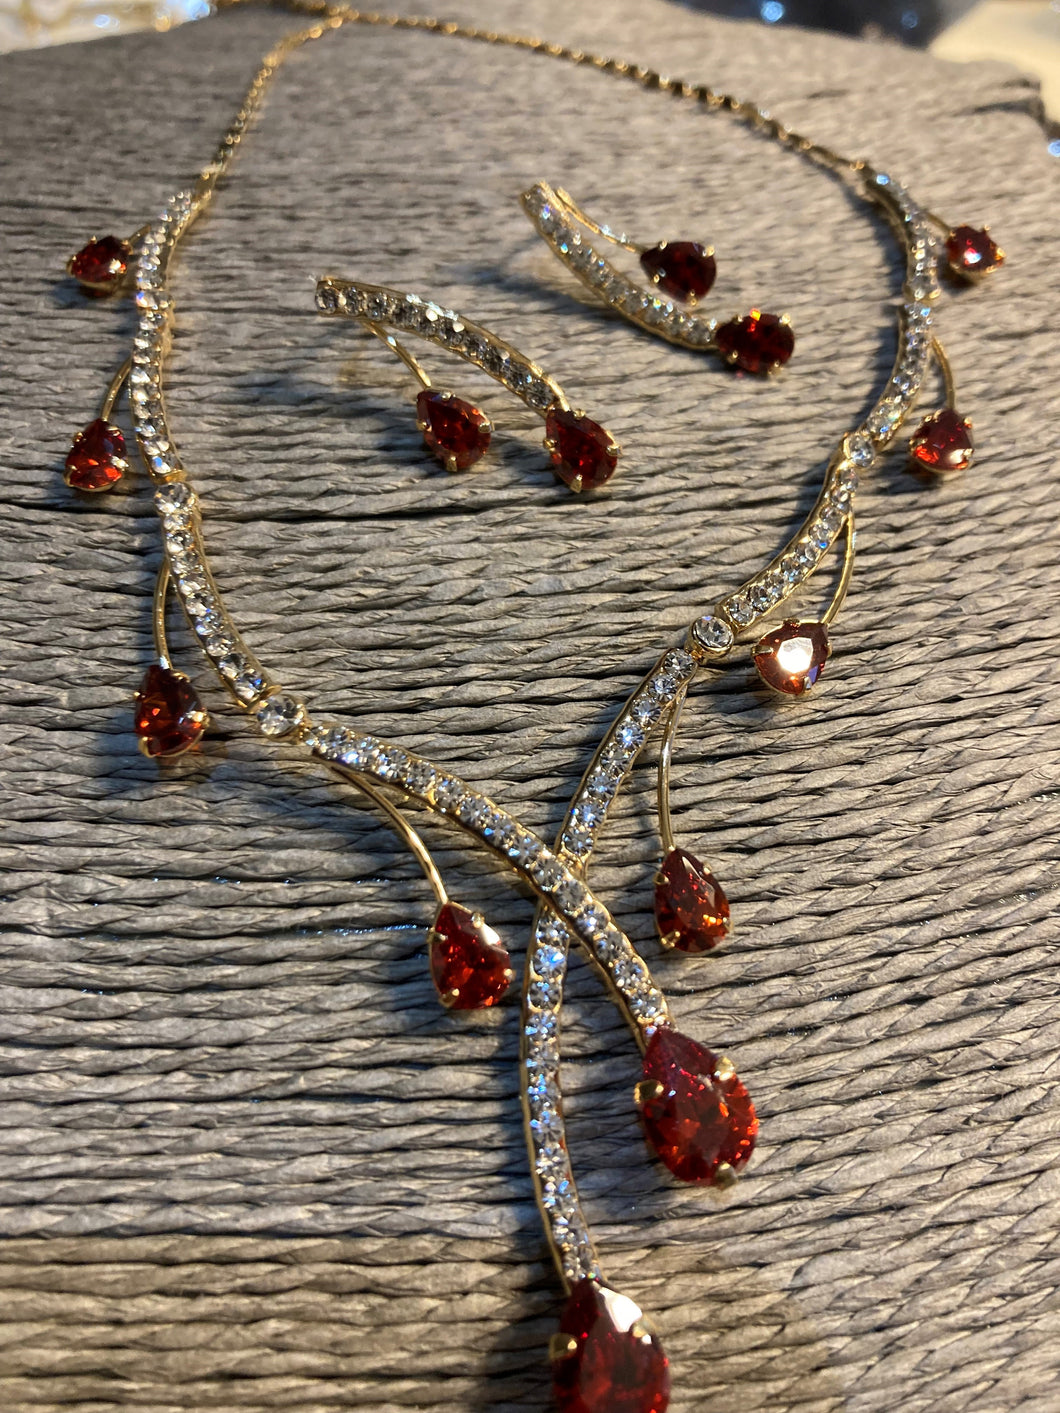 Vintage style Garnet coloured necklet and earrings.